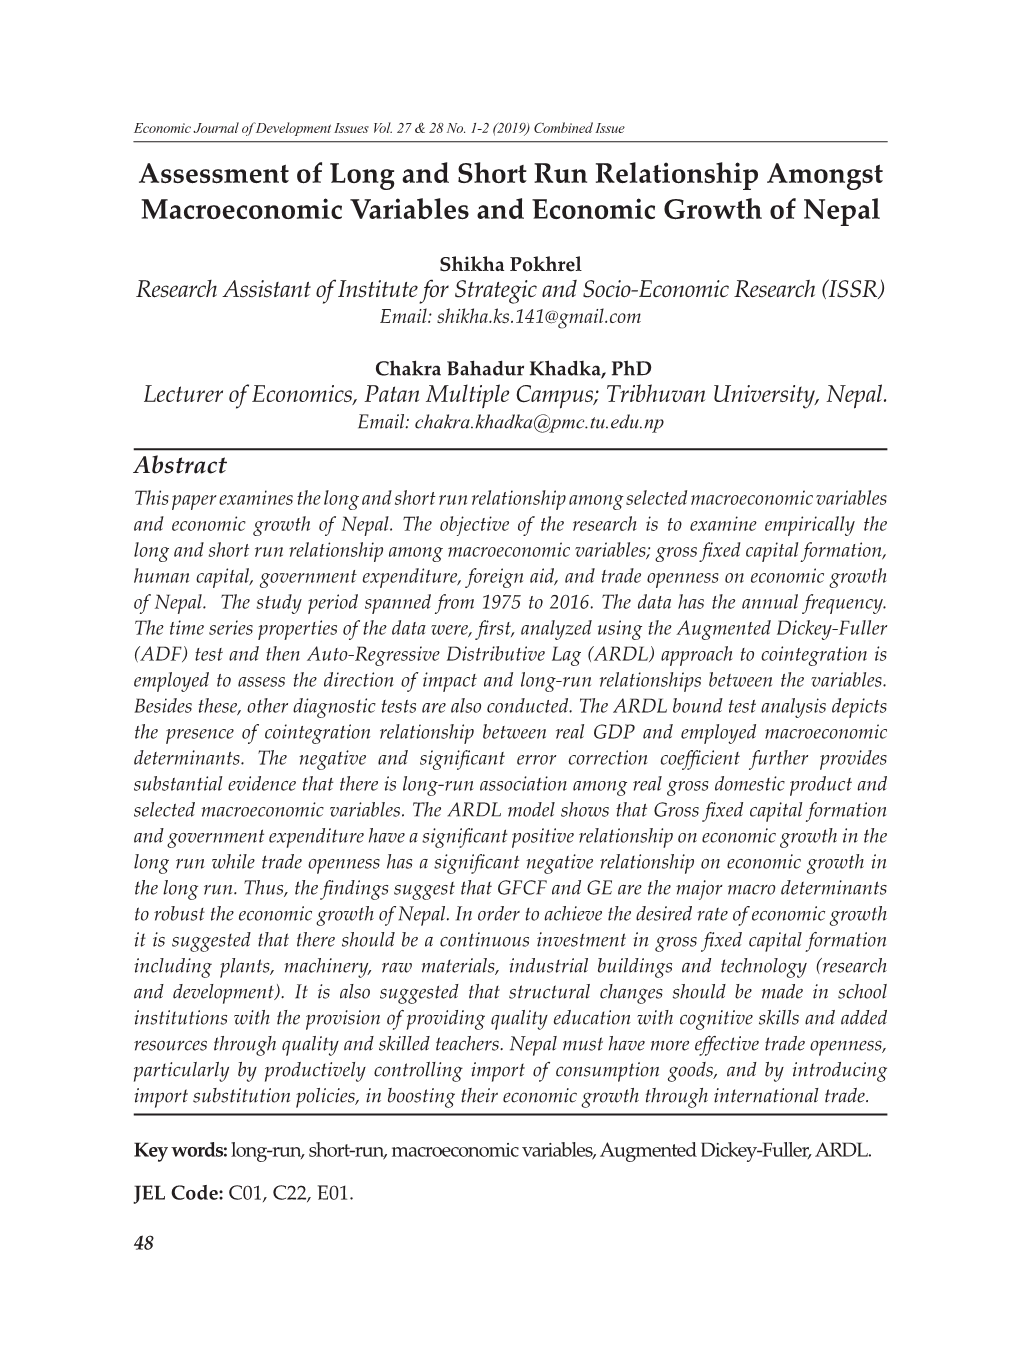 Assessment of Long and Short Run Relationship Amongst Macroeconomic Variables and Economic Growth of Nepal